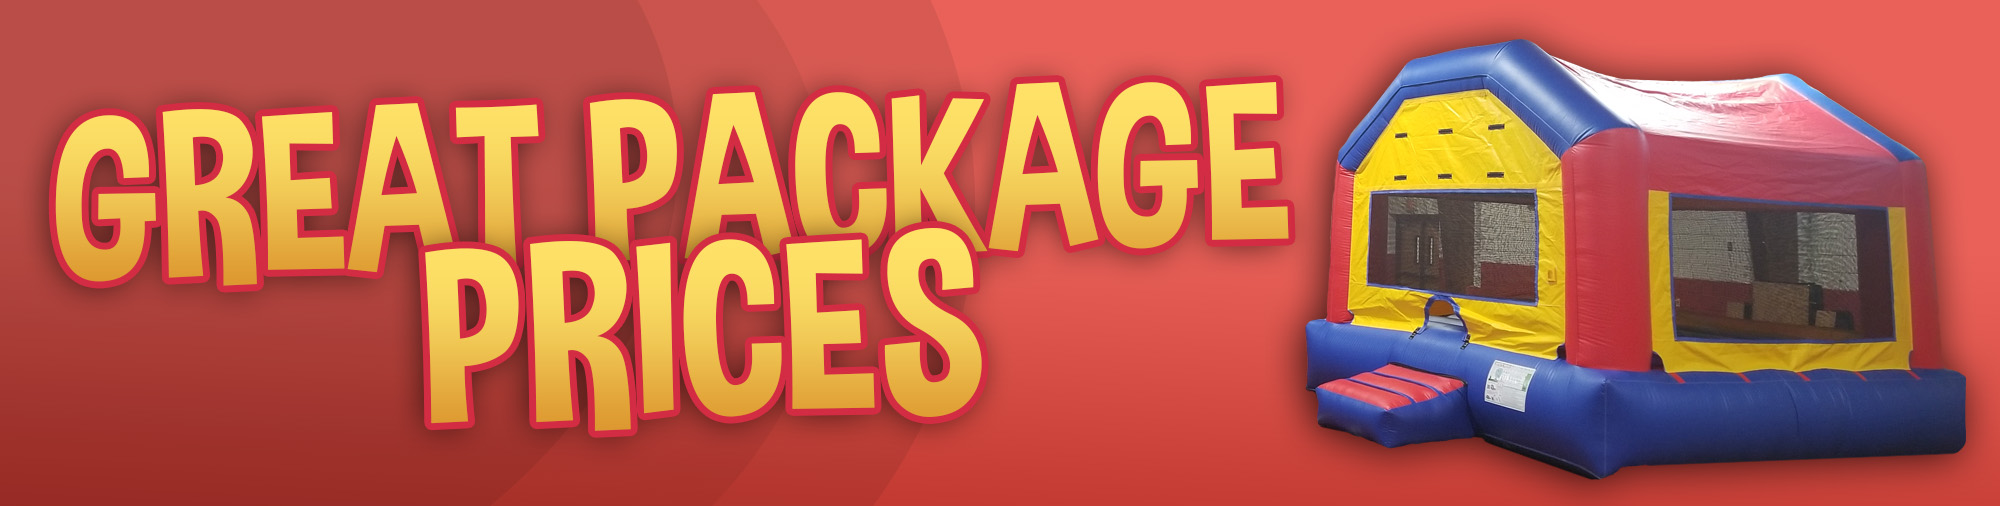 Party packages